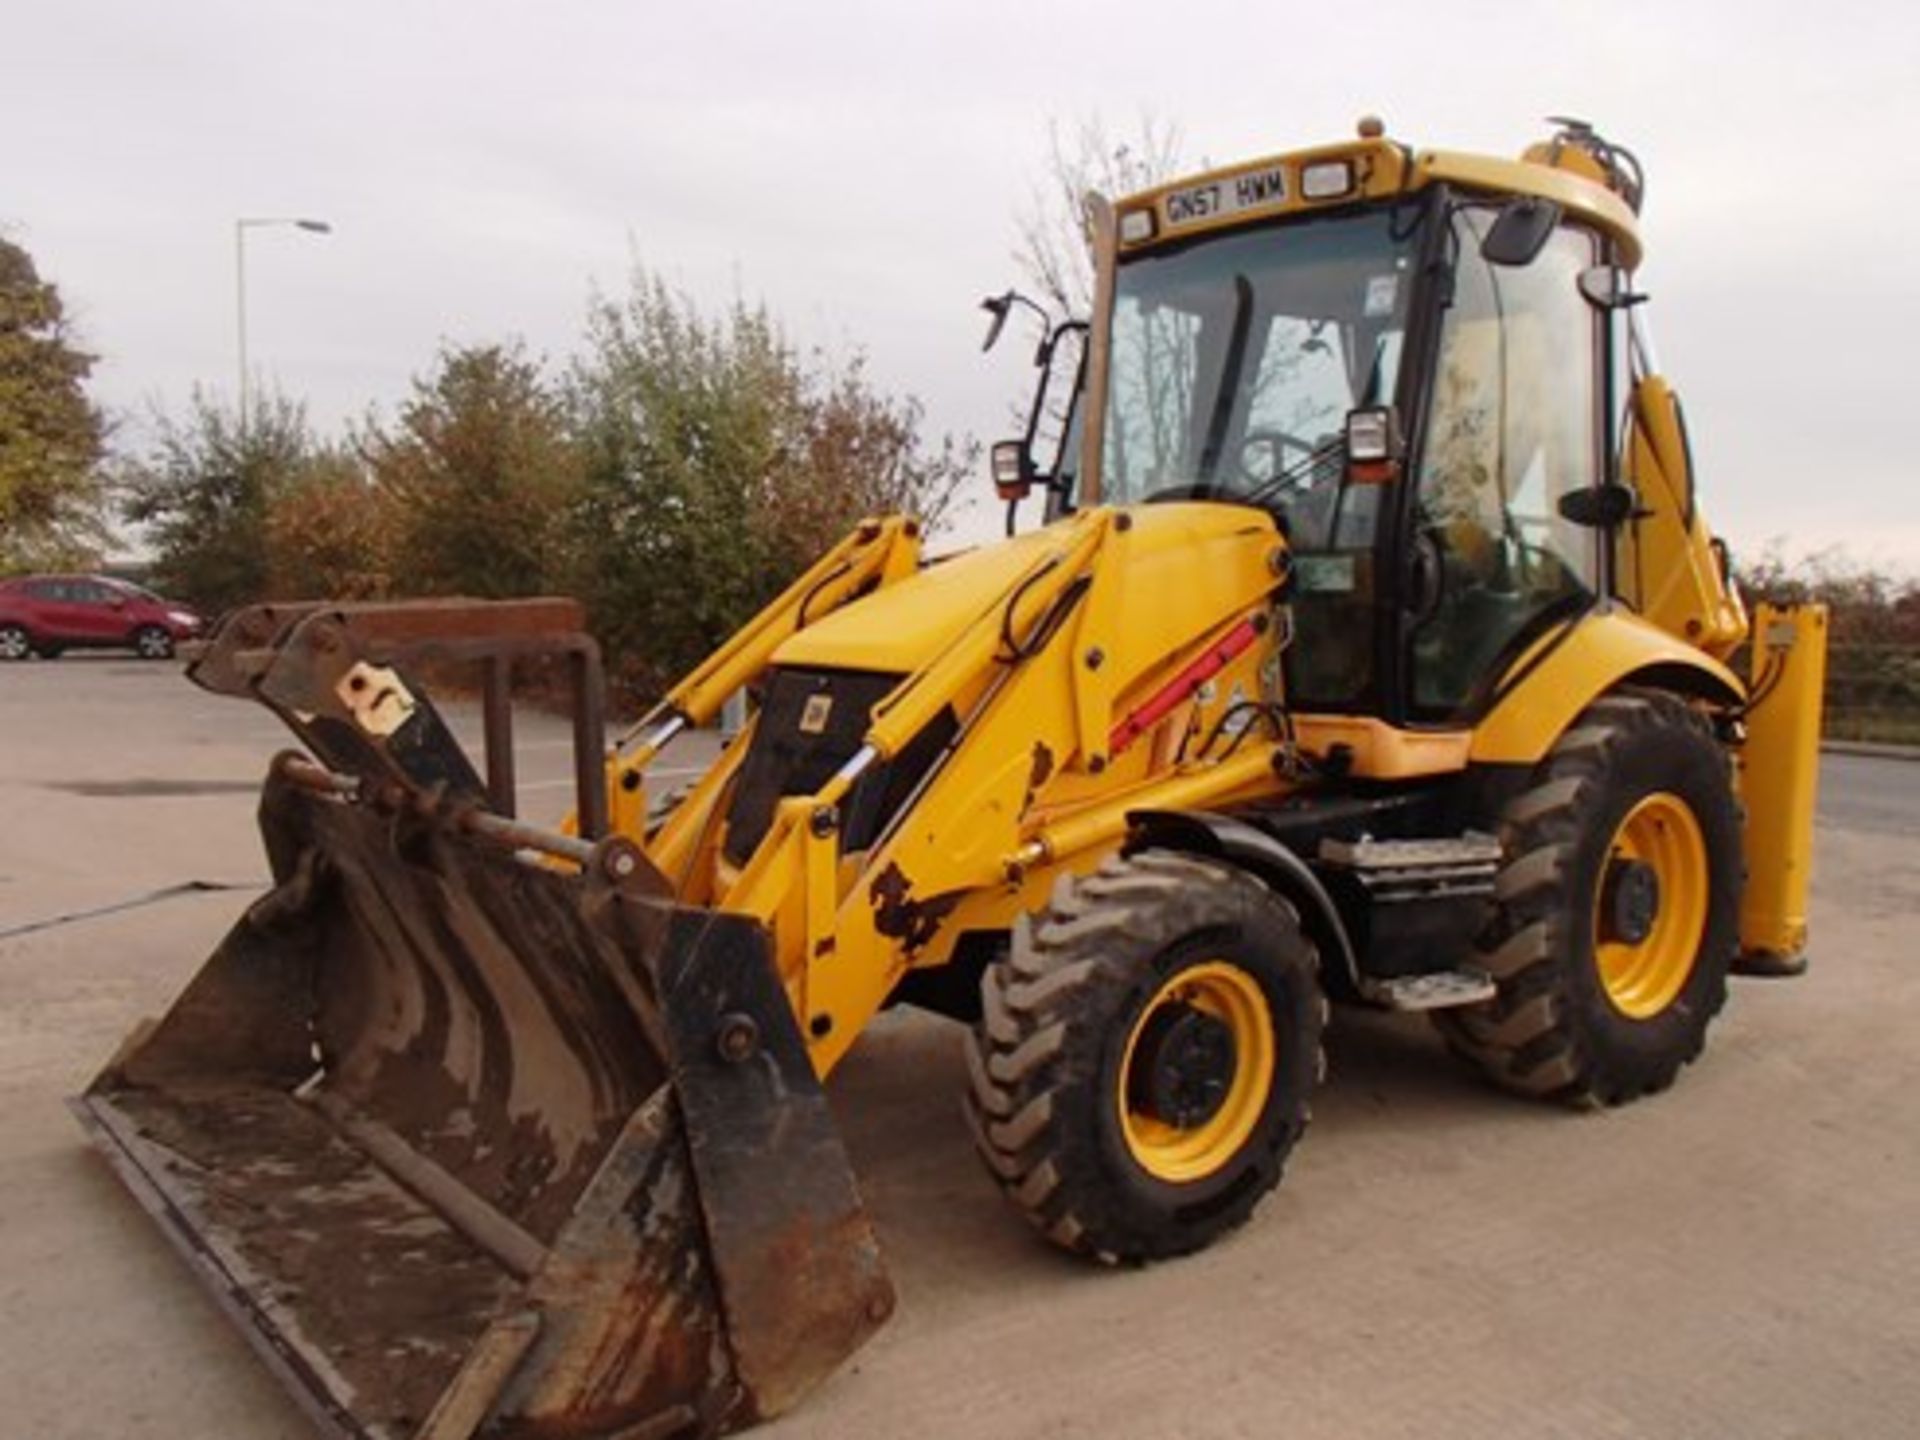 2008 JCB 3CX Digger Loader. Turbo Engine, Piped, Quick Hitch, 4in1 Bucket, Extending Dipper Arm,